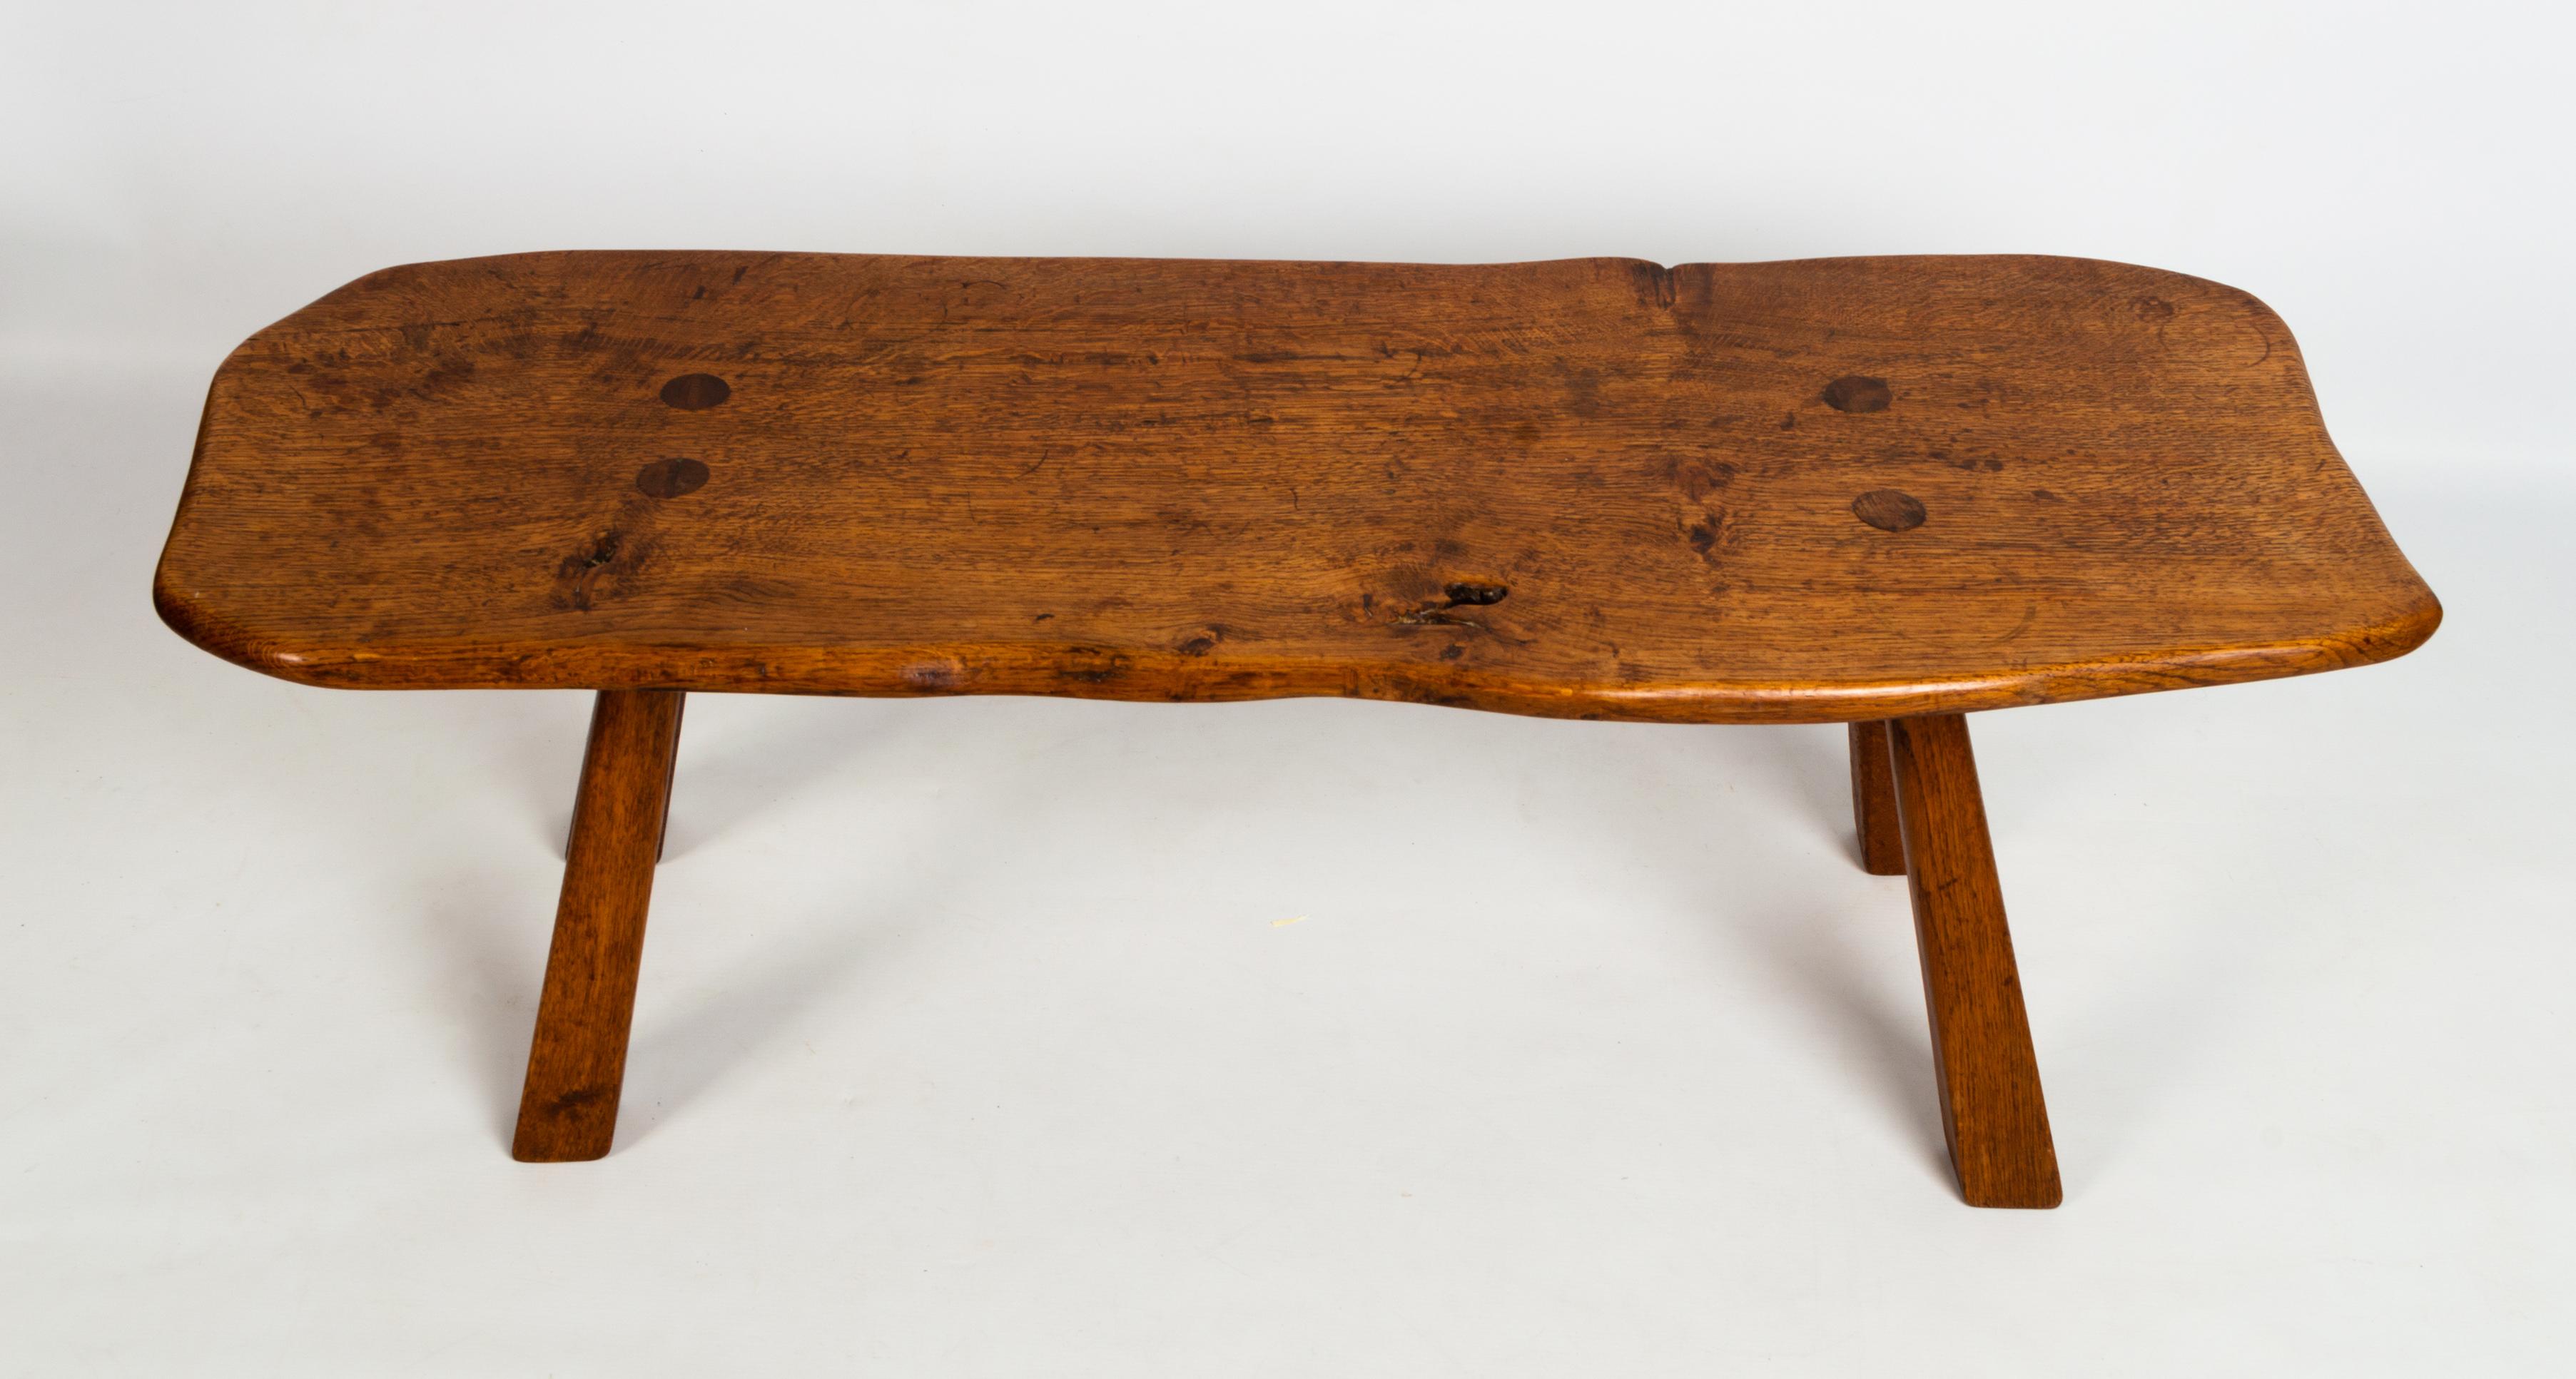  English Arts & Crafts Cotswolds School Oak Bench Coffee Table Console, C.1950 For Sale 2